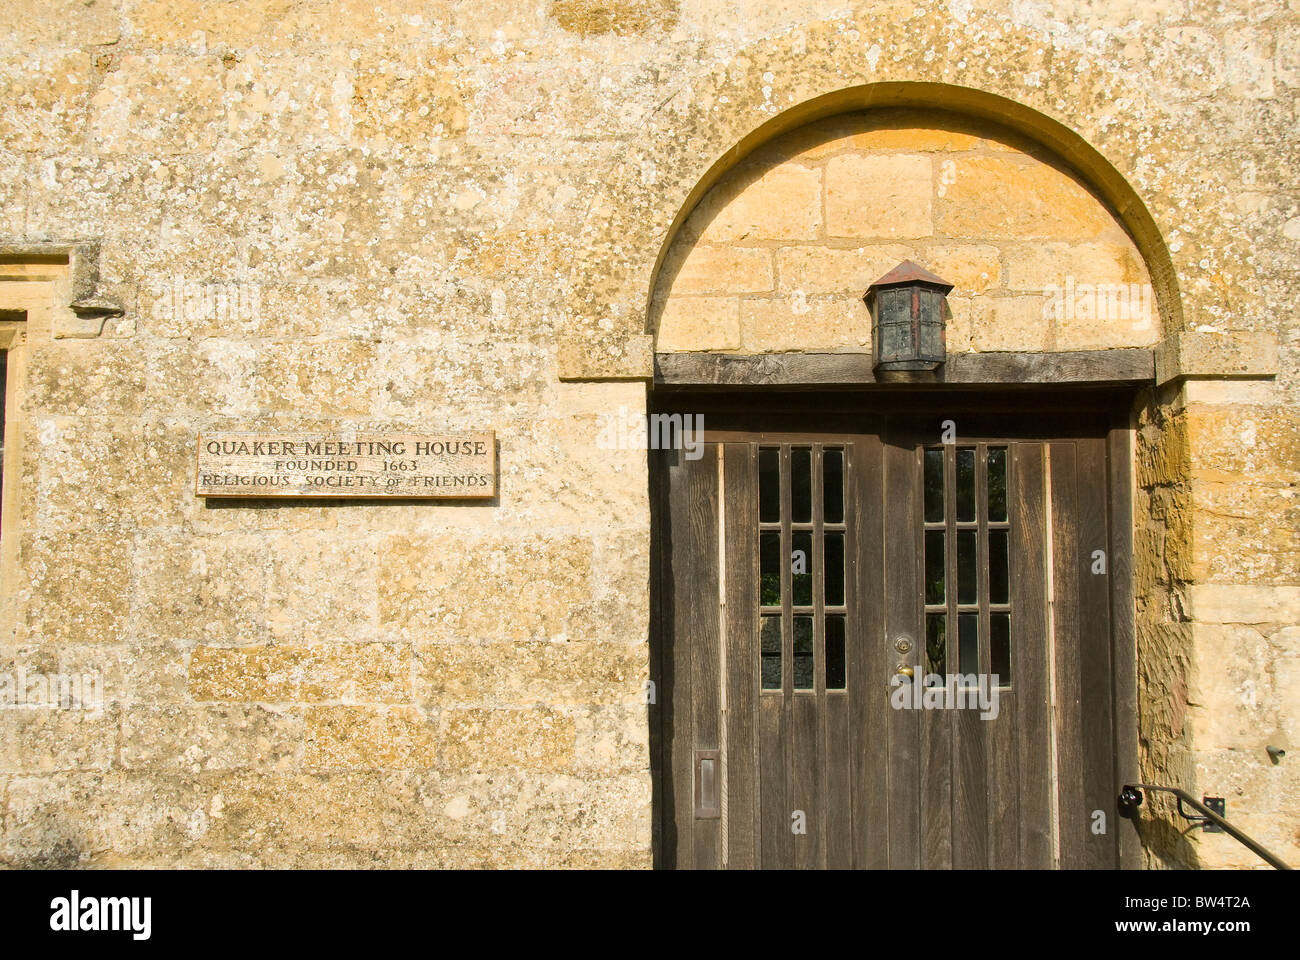 Quaker Meeting House, Broad Campden, Cotswolds, Cotswold, Gloucestershire, England, United Kingdom, Europe Stock Photo